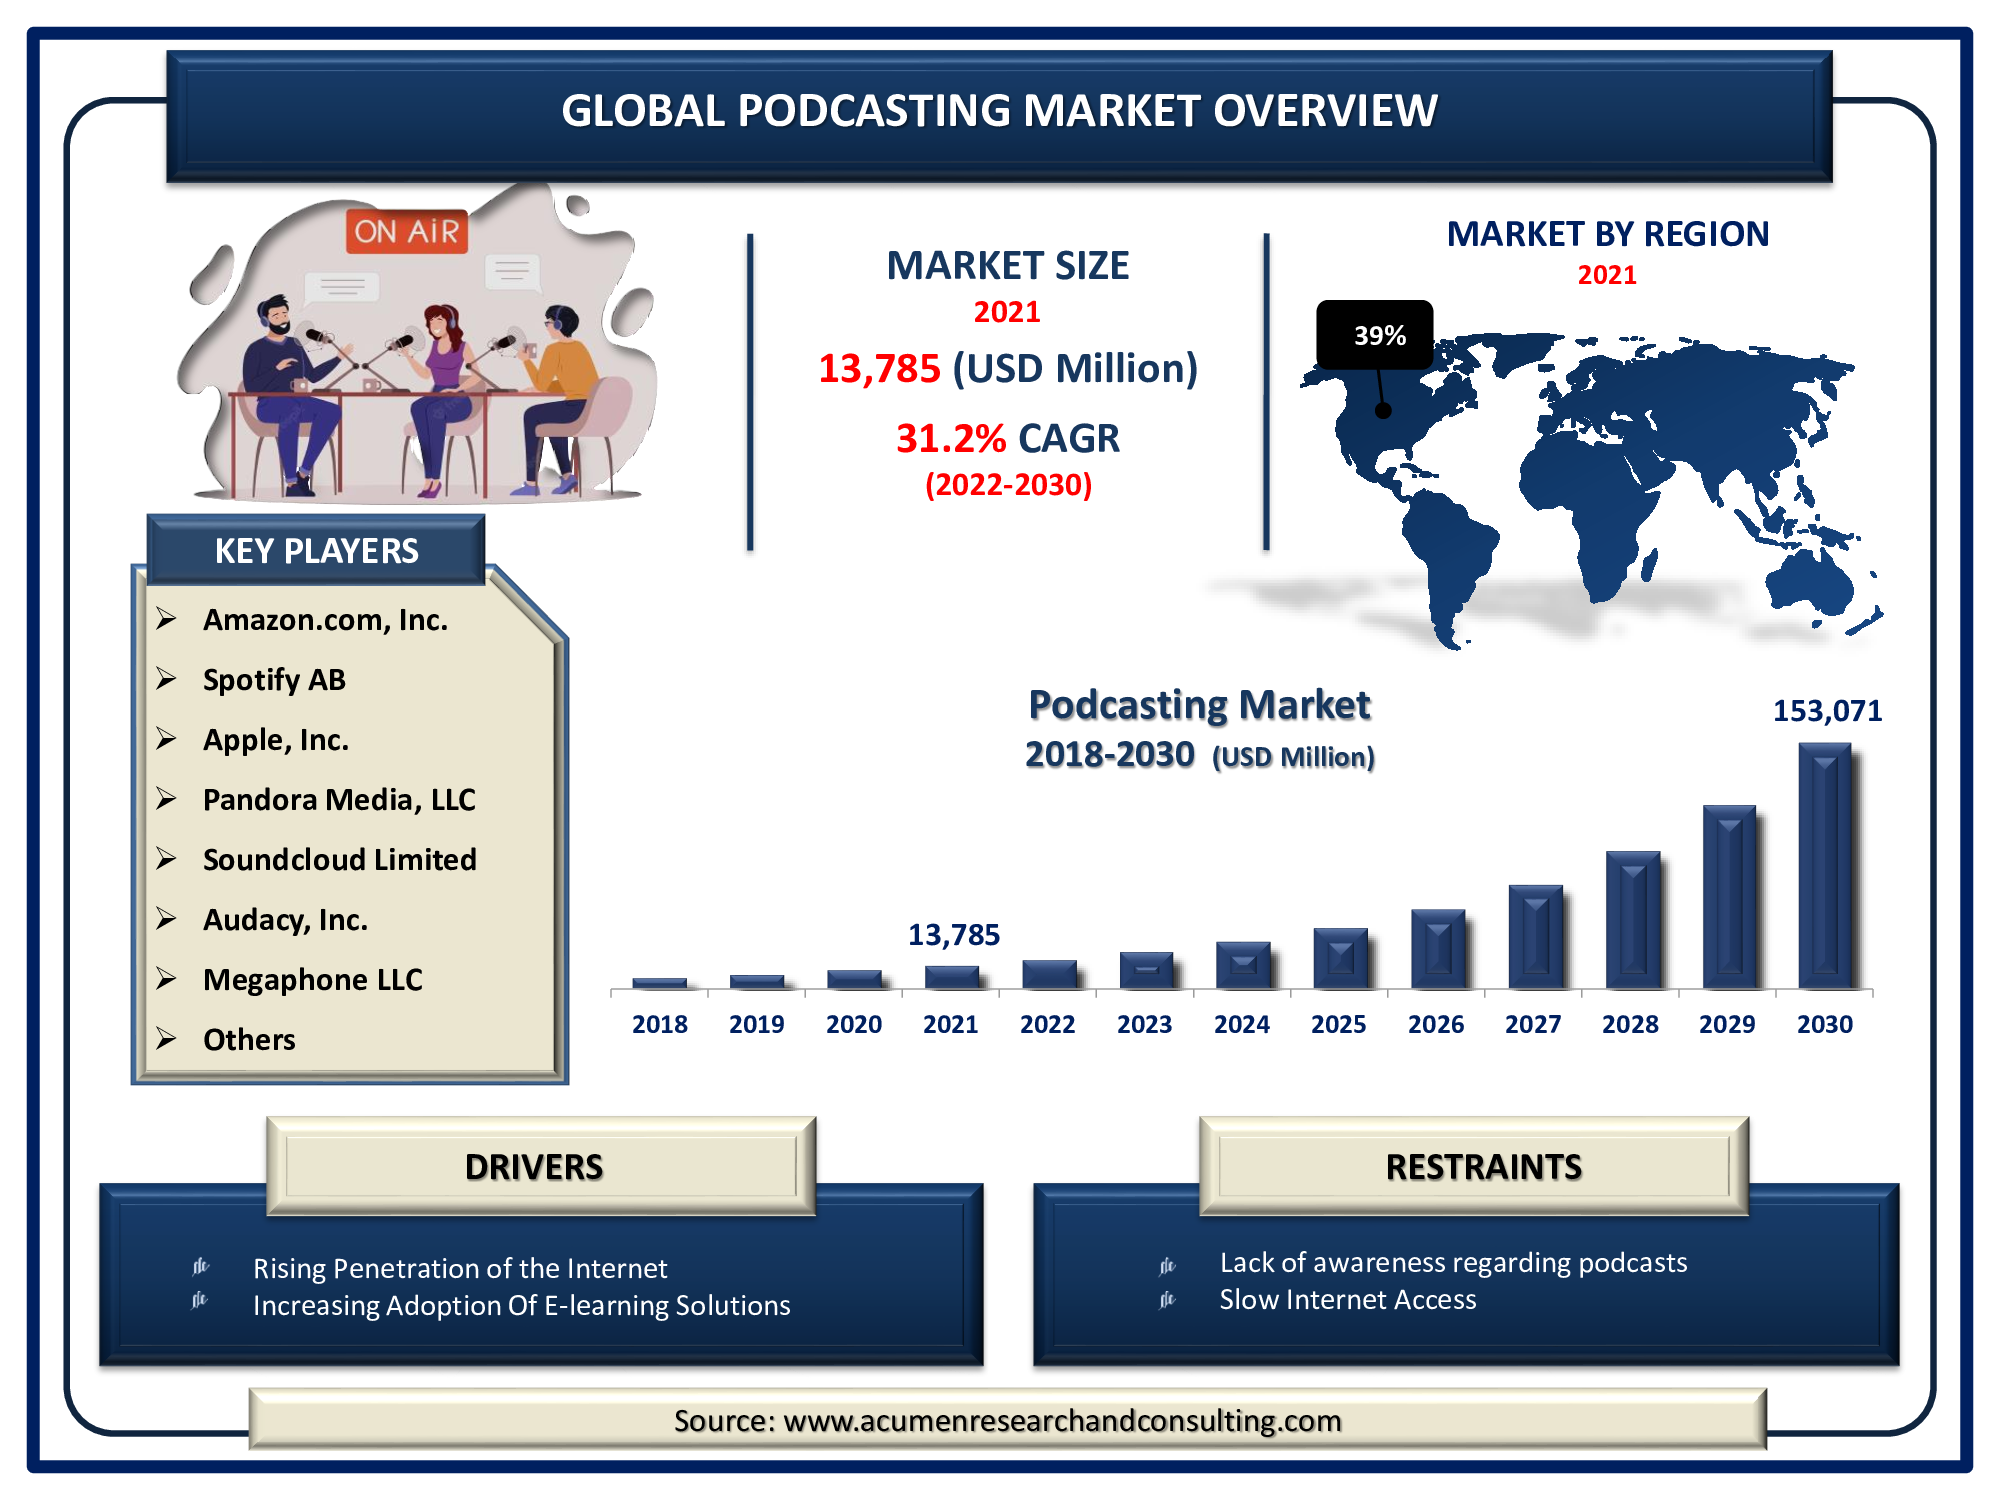 Podcasting Market Size was valued at USD 13,785 Million in 2021 and is predicted to be worth USD 153,071 Million by 2030, with a CAGR of 31.2% from 2022 to 2030.